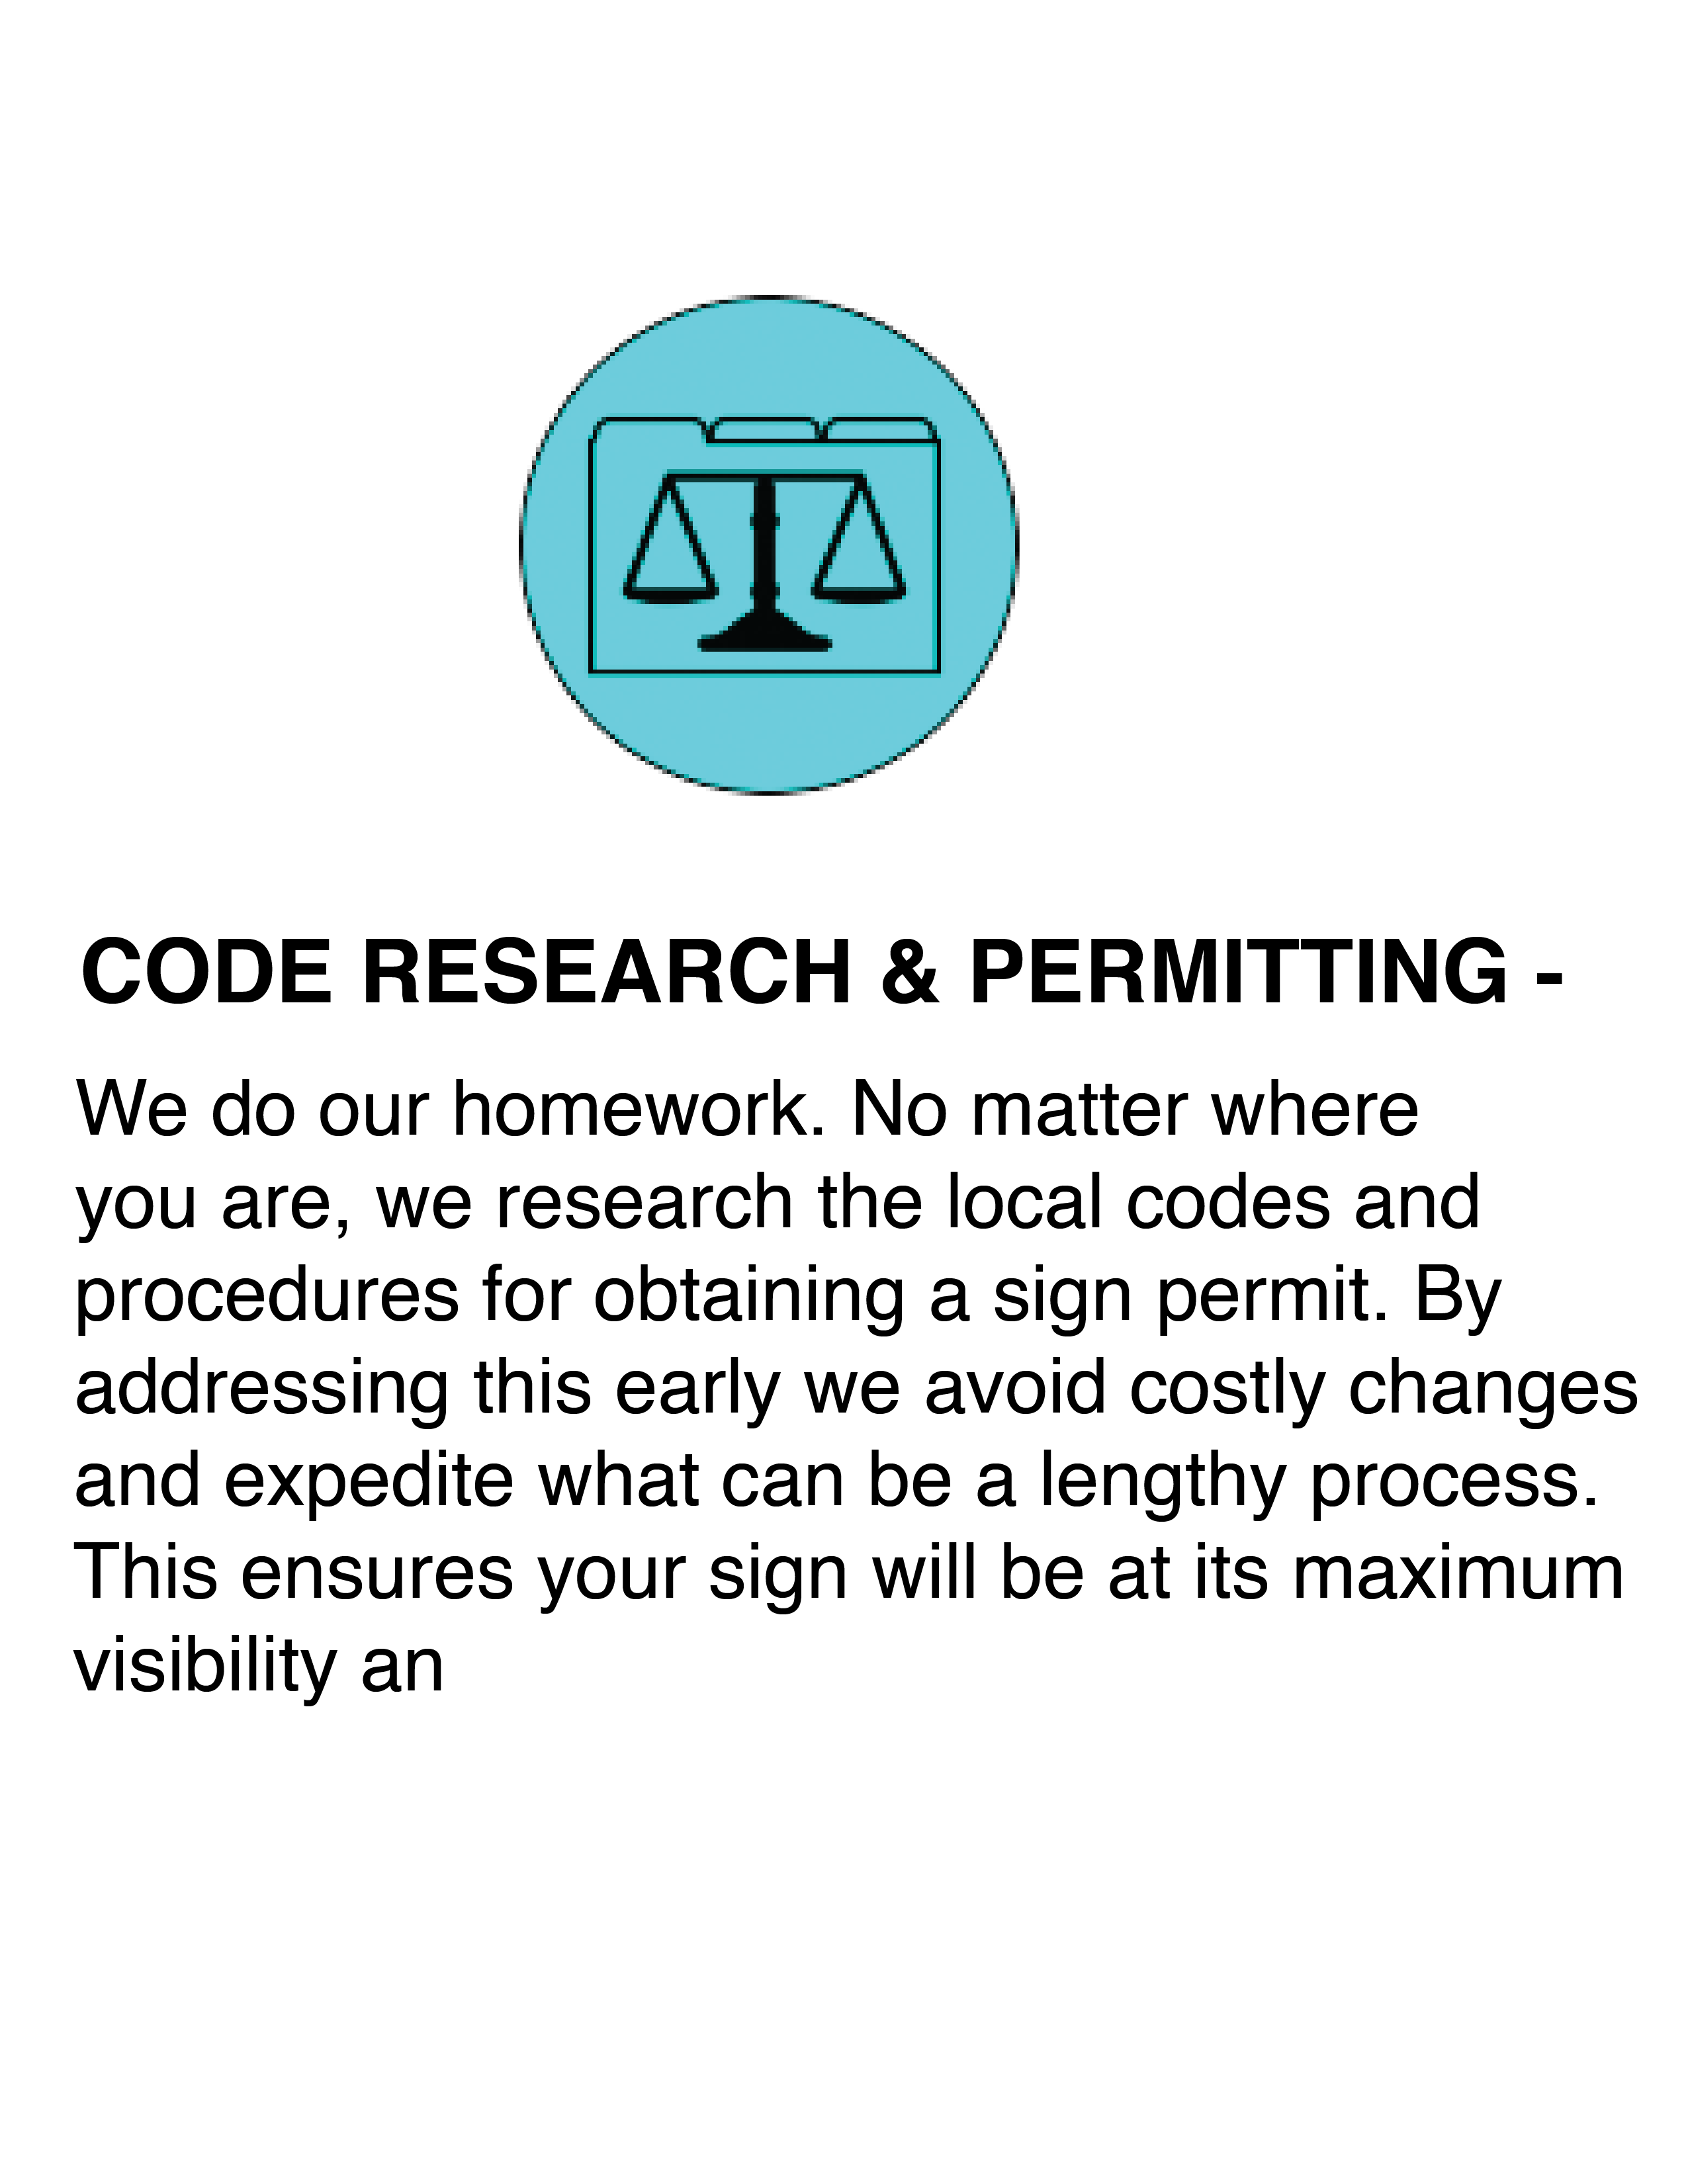 Code Research & Permitting